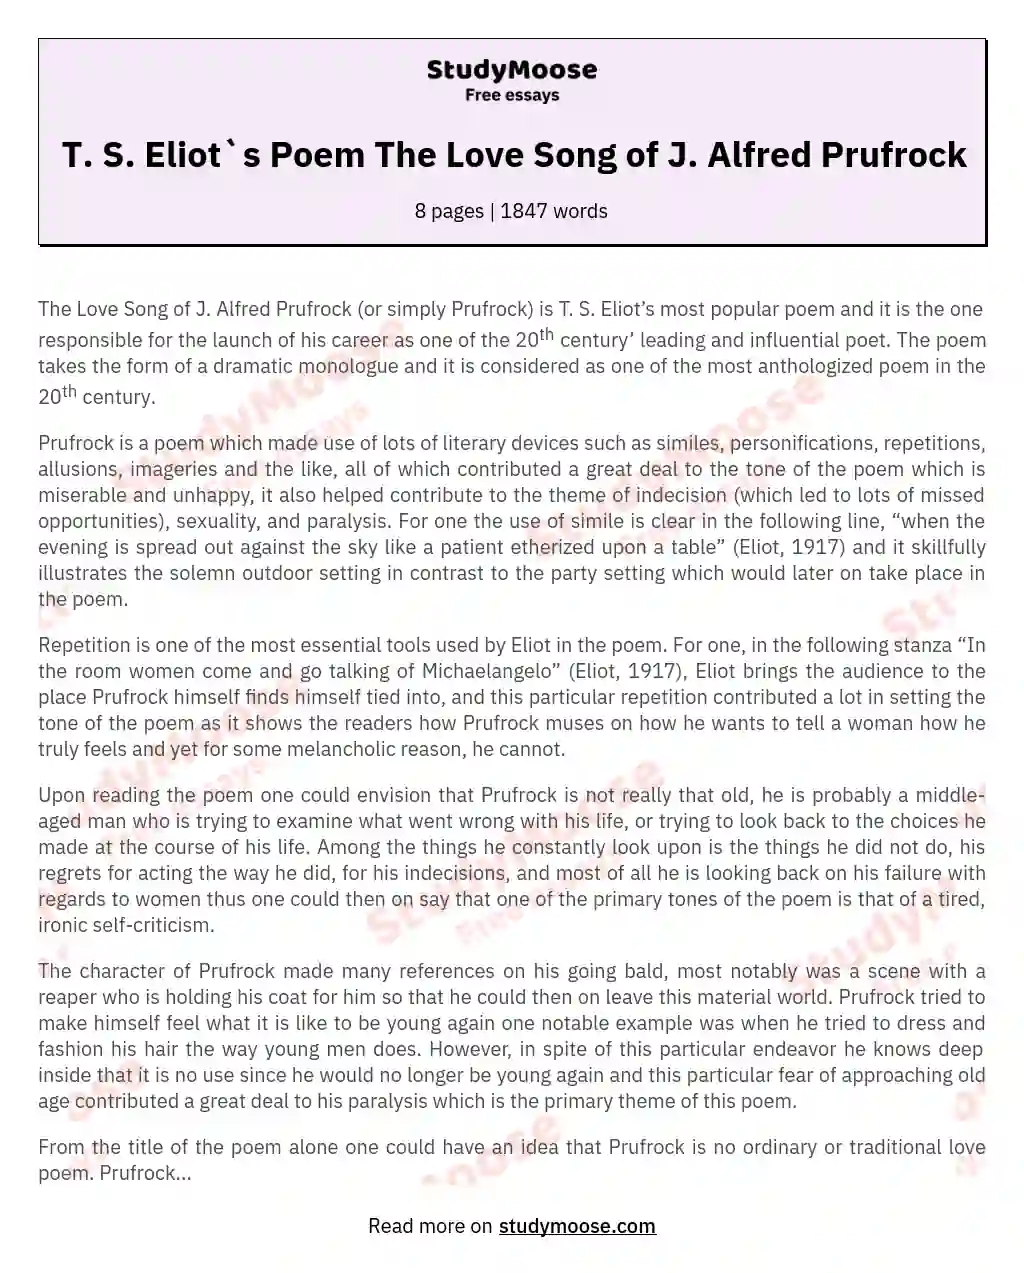 T. S. Eliot`s Poem The Love Song of J. Alfred Prufrock